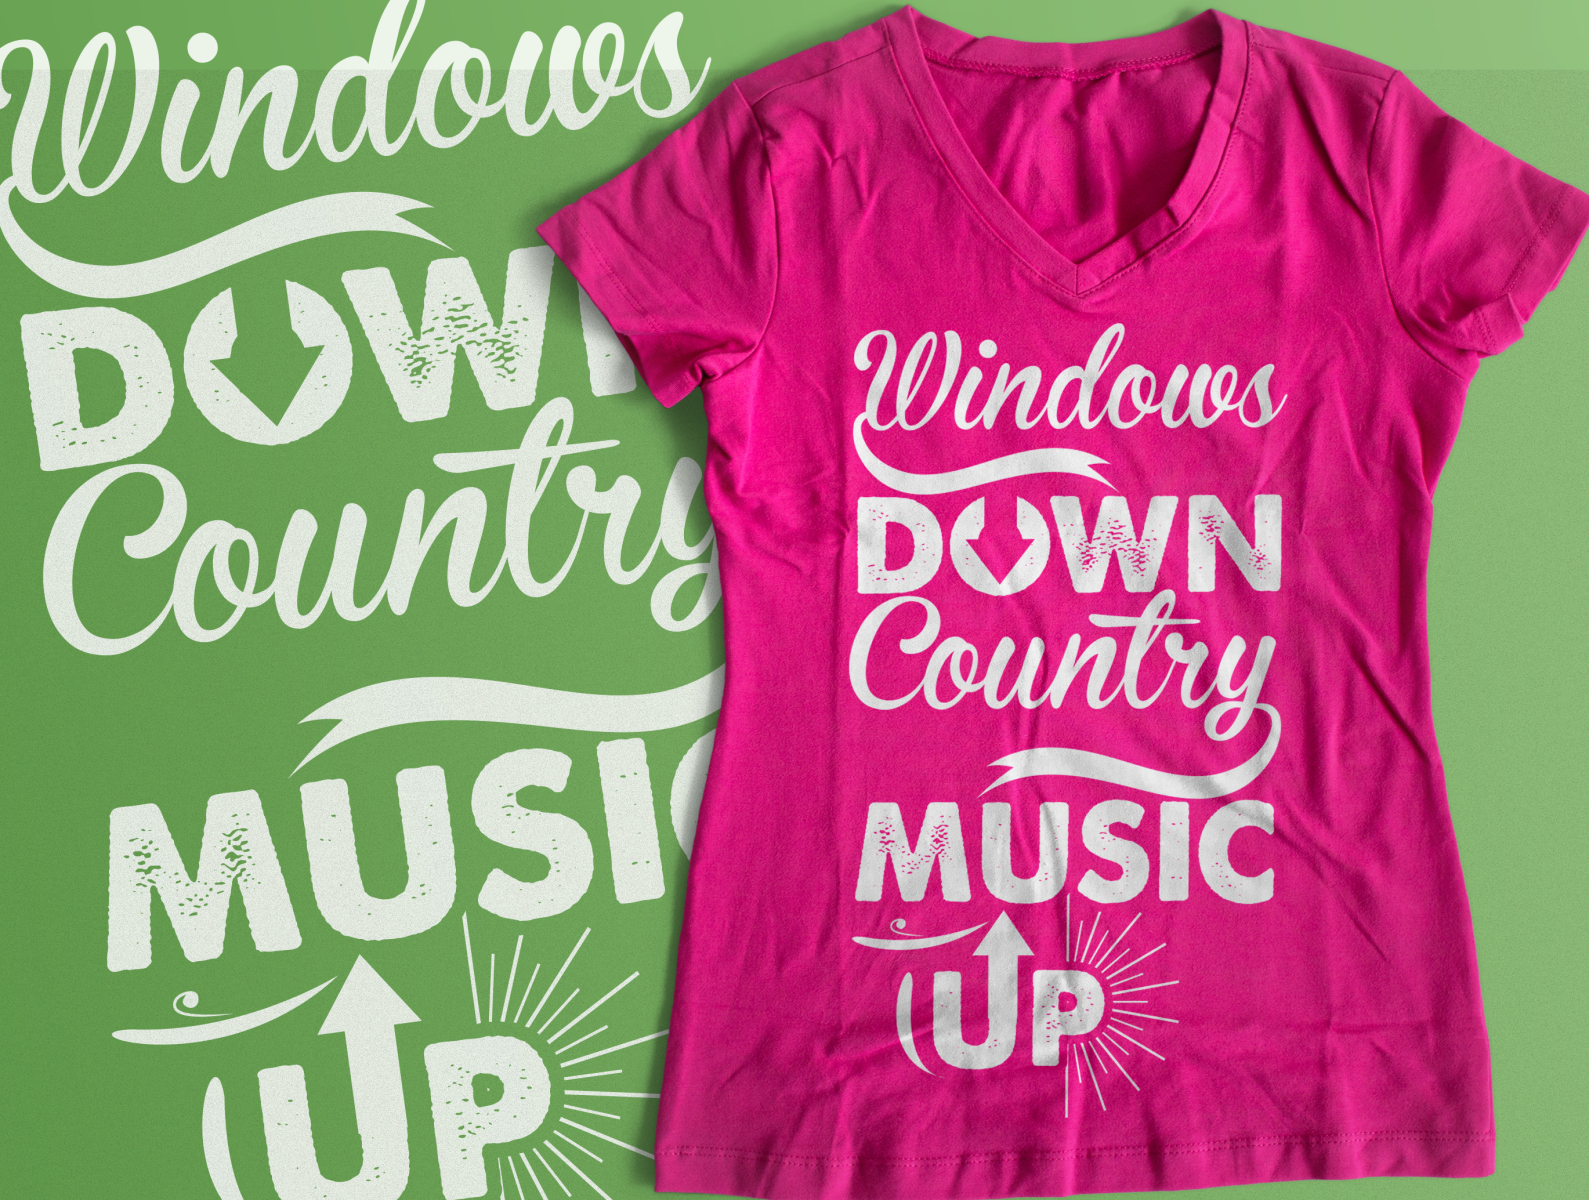 Music Lover Girls T Shirt By Afridi Biswas On Dribbble